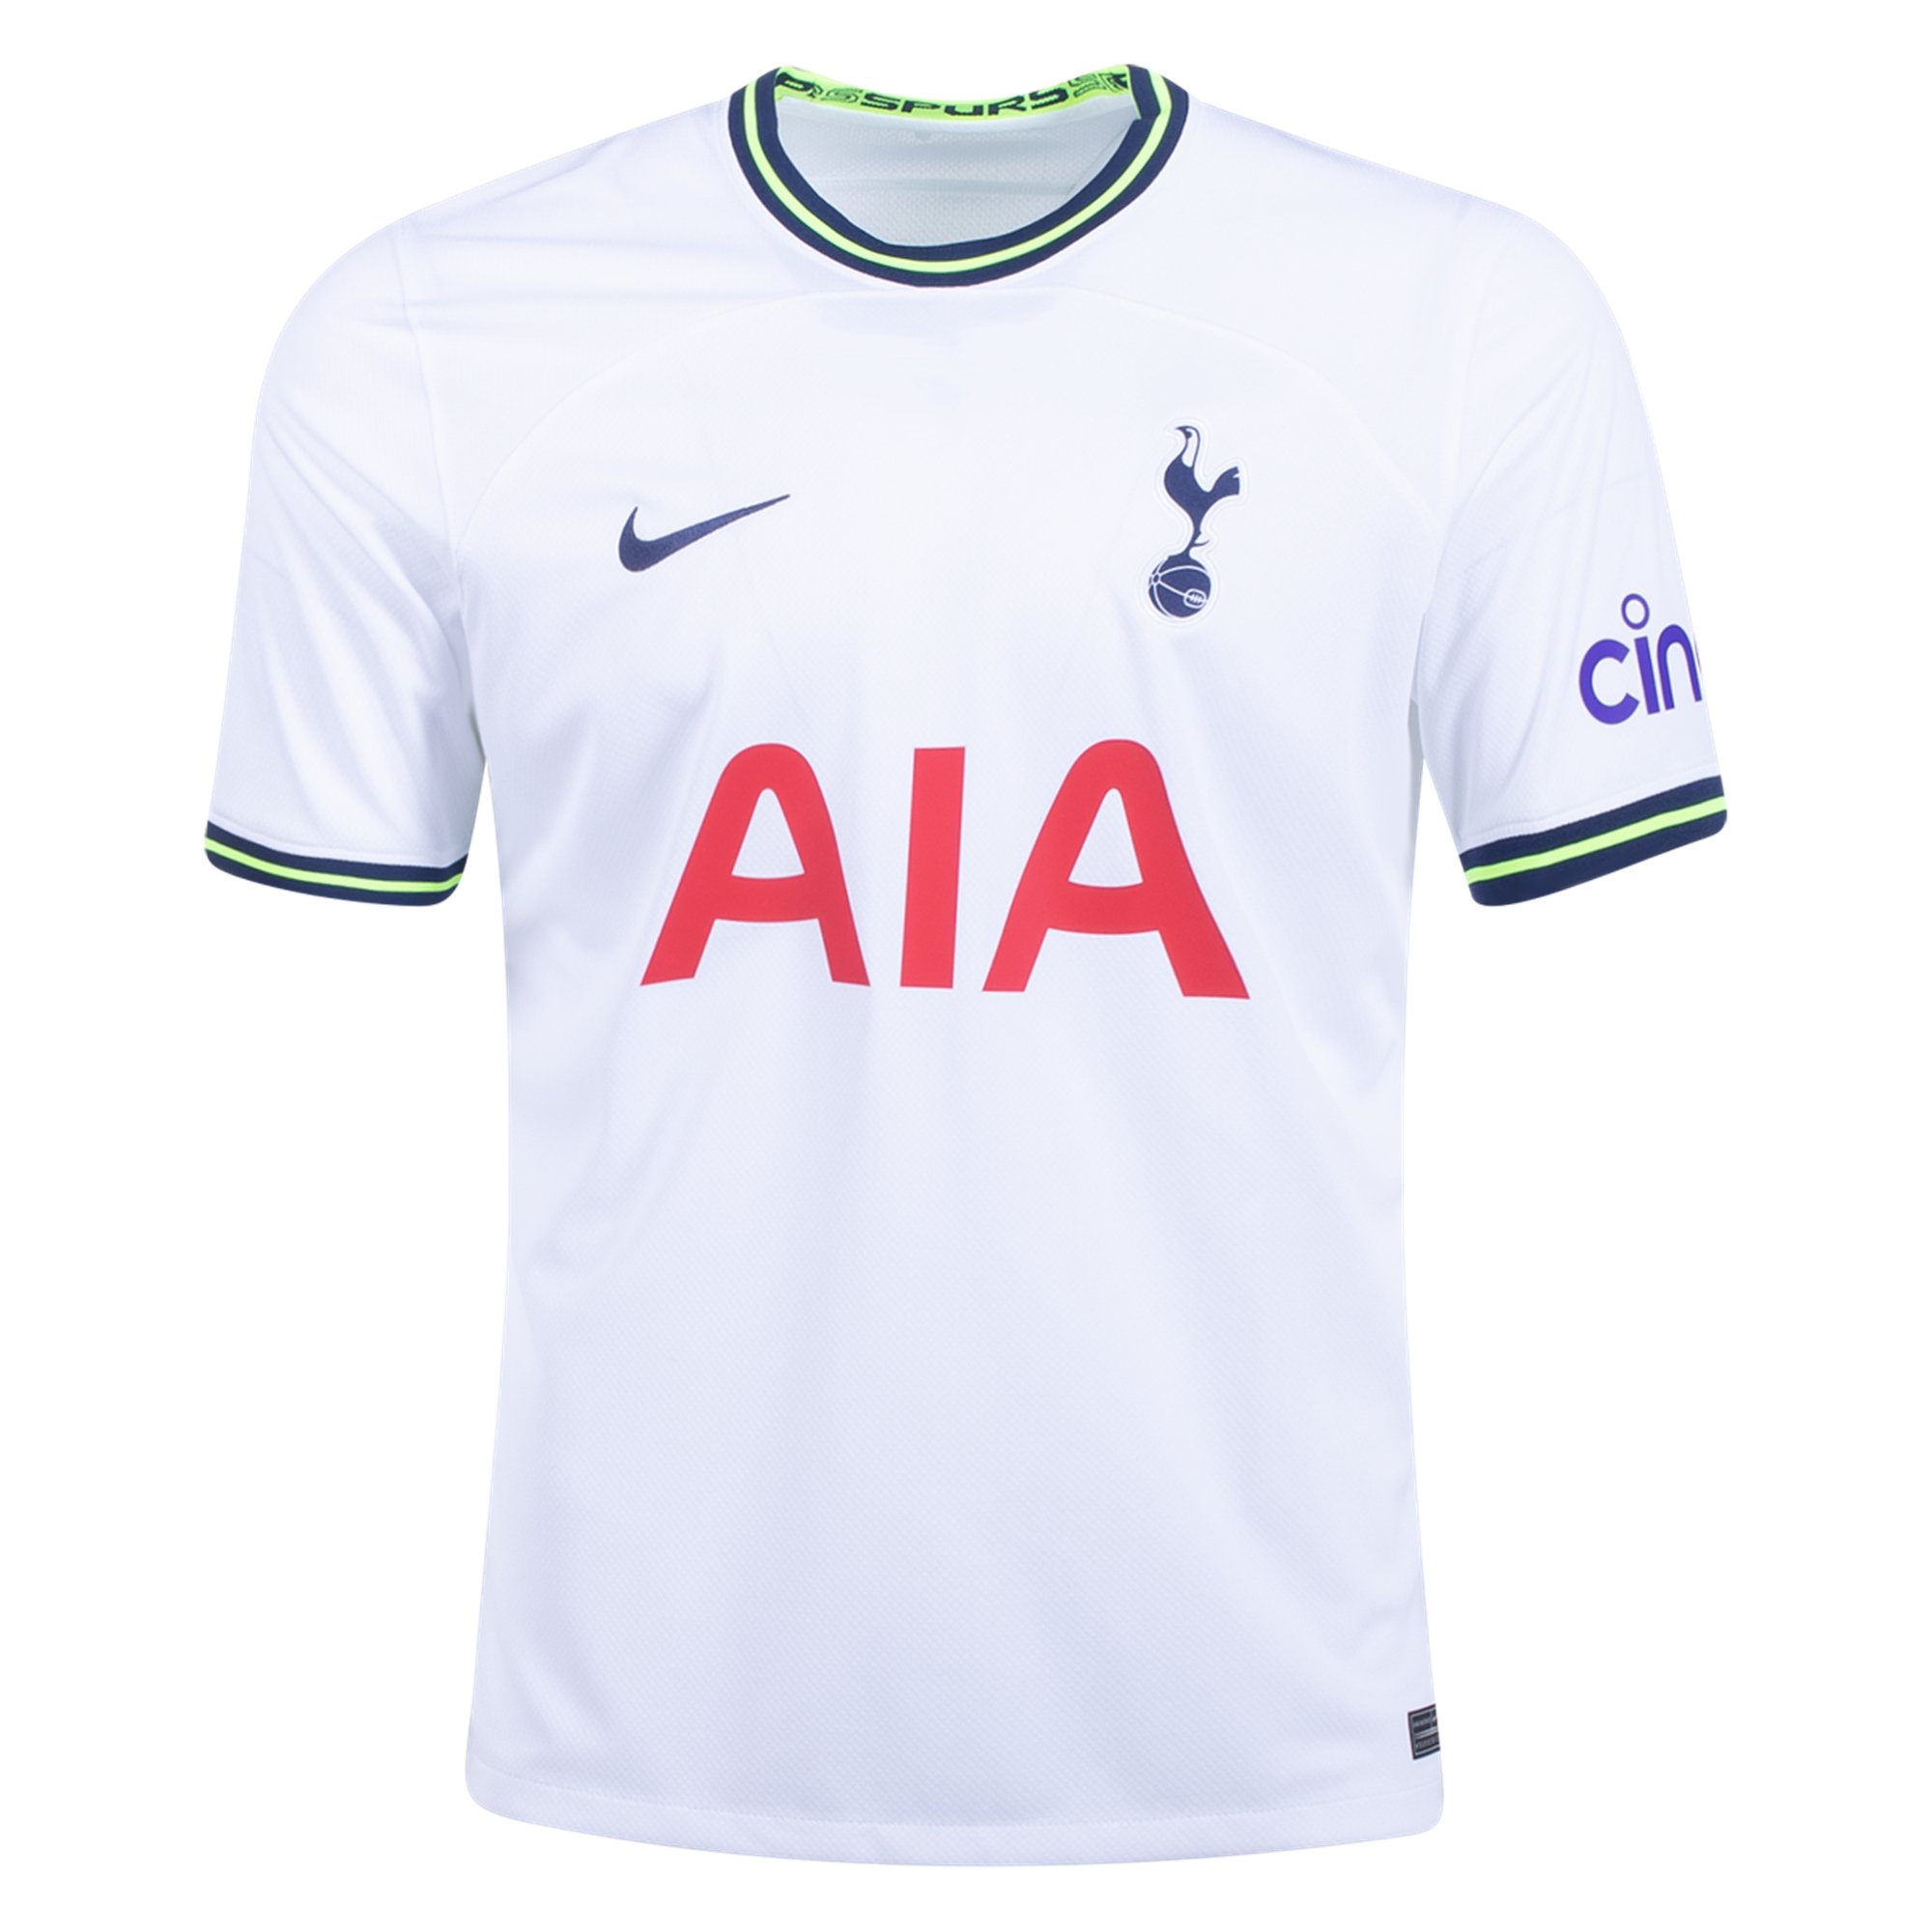 DHGate Tottenham Hotspur 22/23 Home Jersey Review + Unboxing